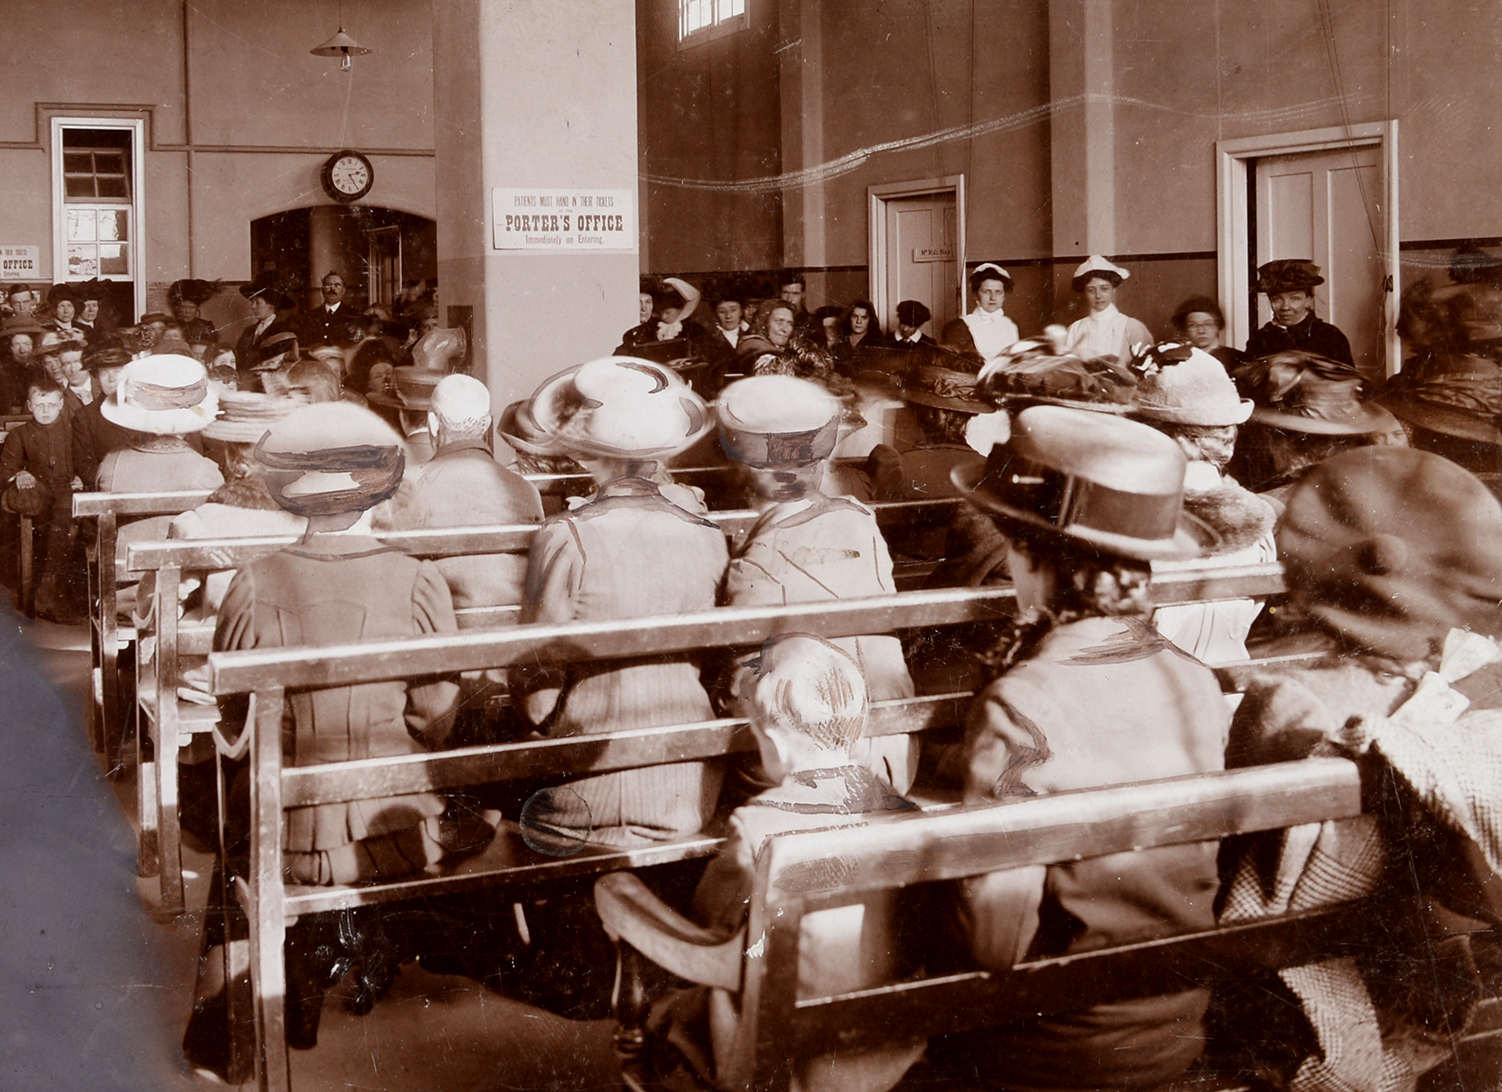 People sit in a waiting room early 1900s ref. D/H6/22/13/1